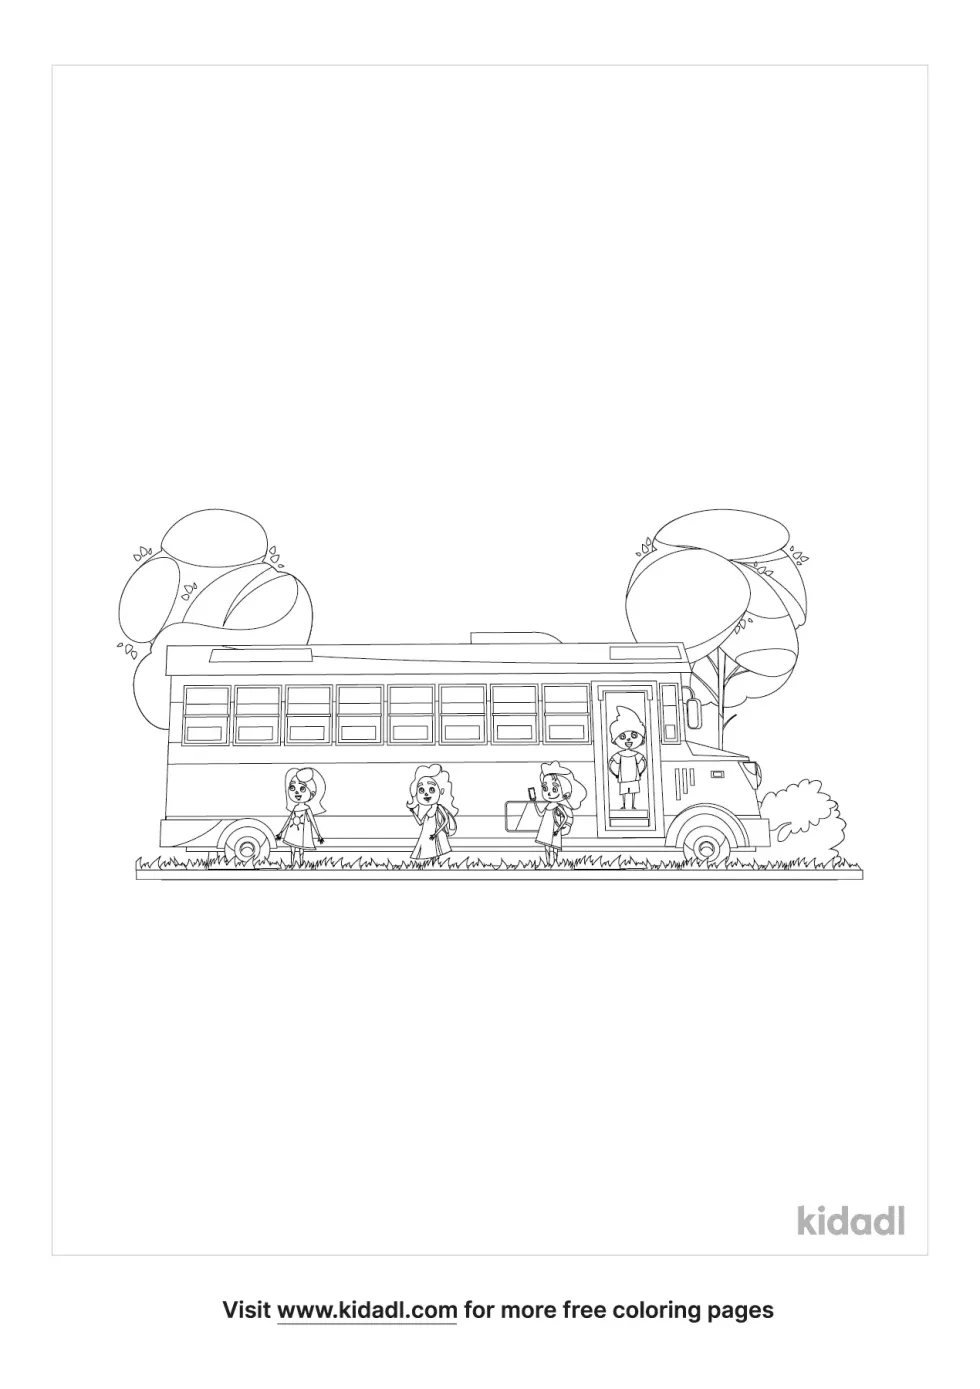 Girls Getting Off The Bus Coloring Page